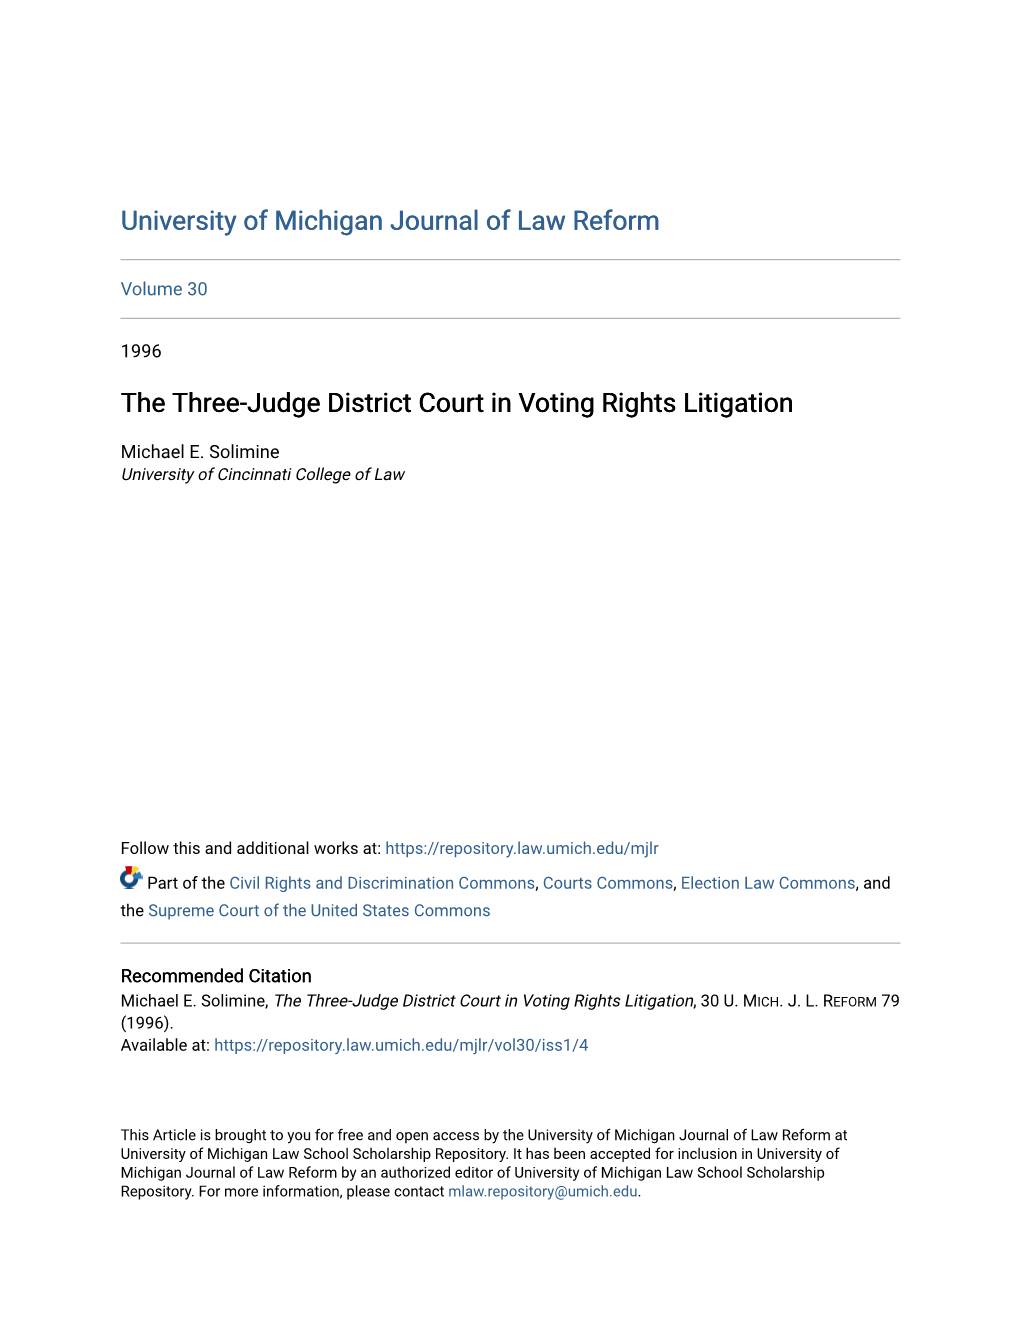 The Three-Judge District Court in Voting Rights Litigation